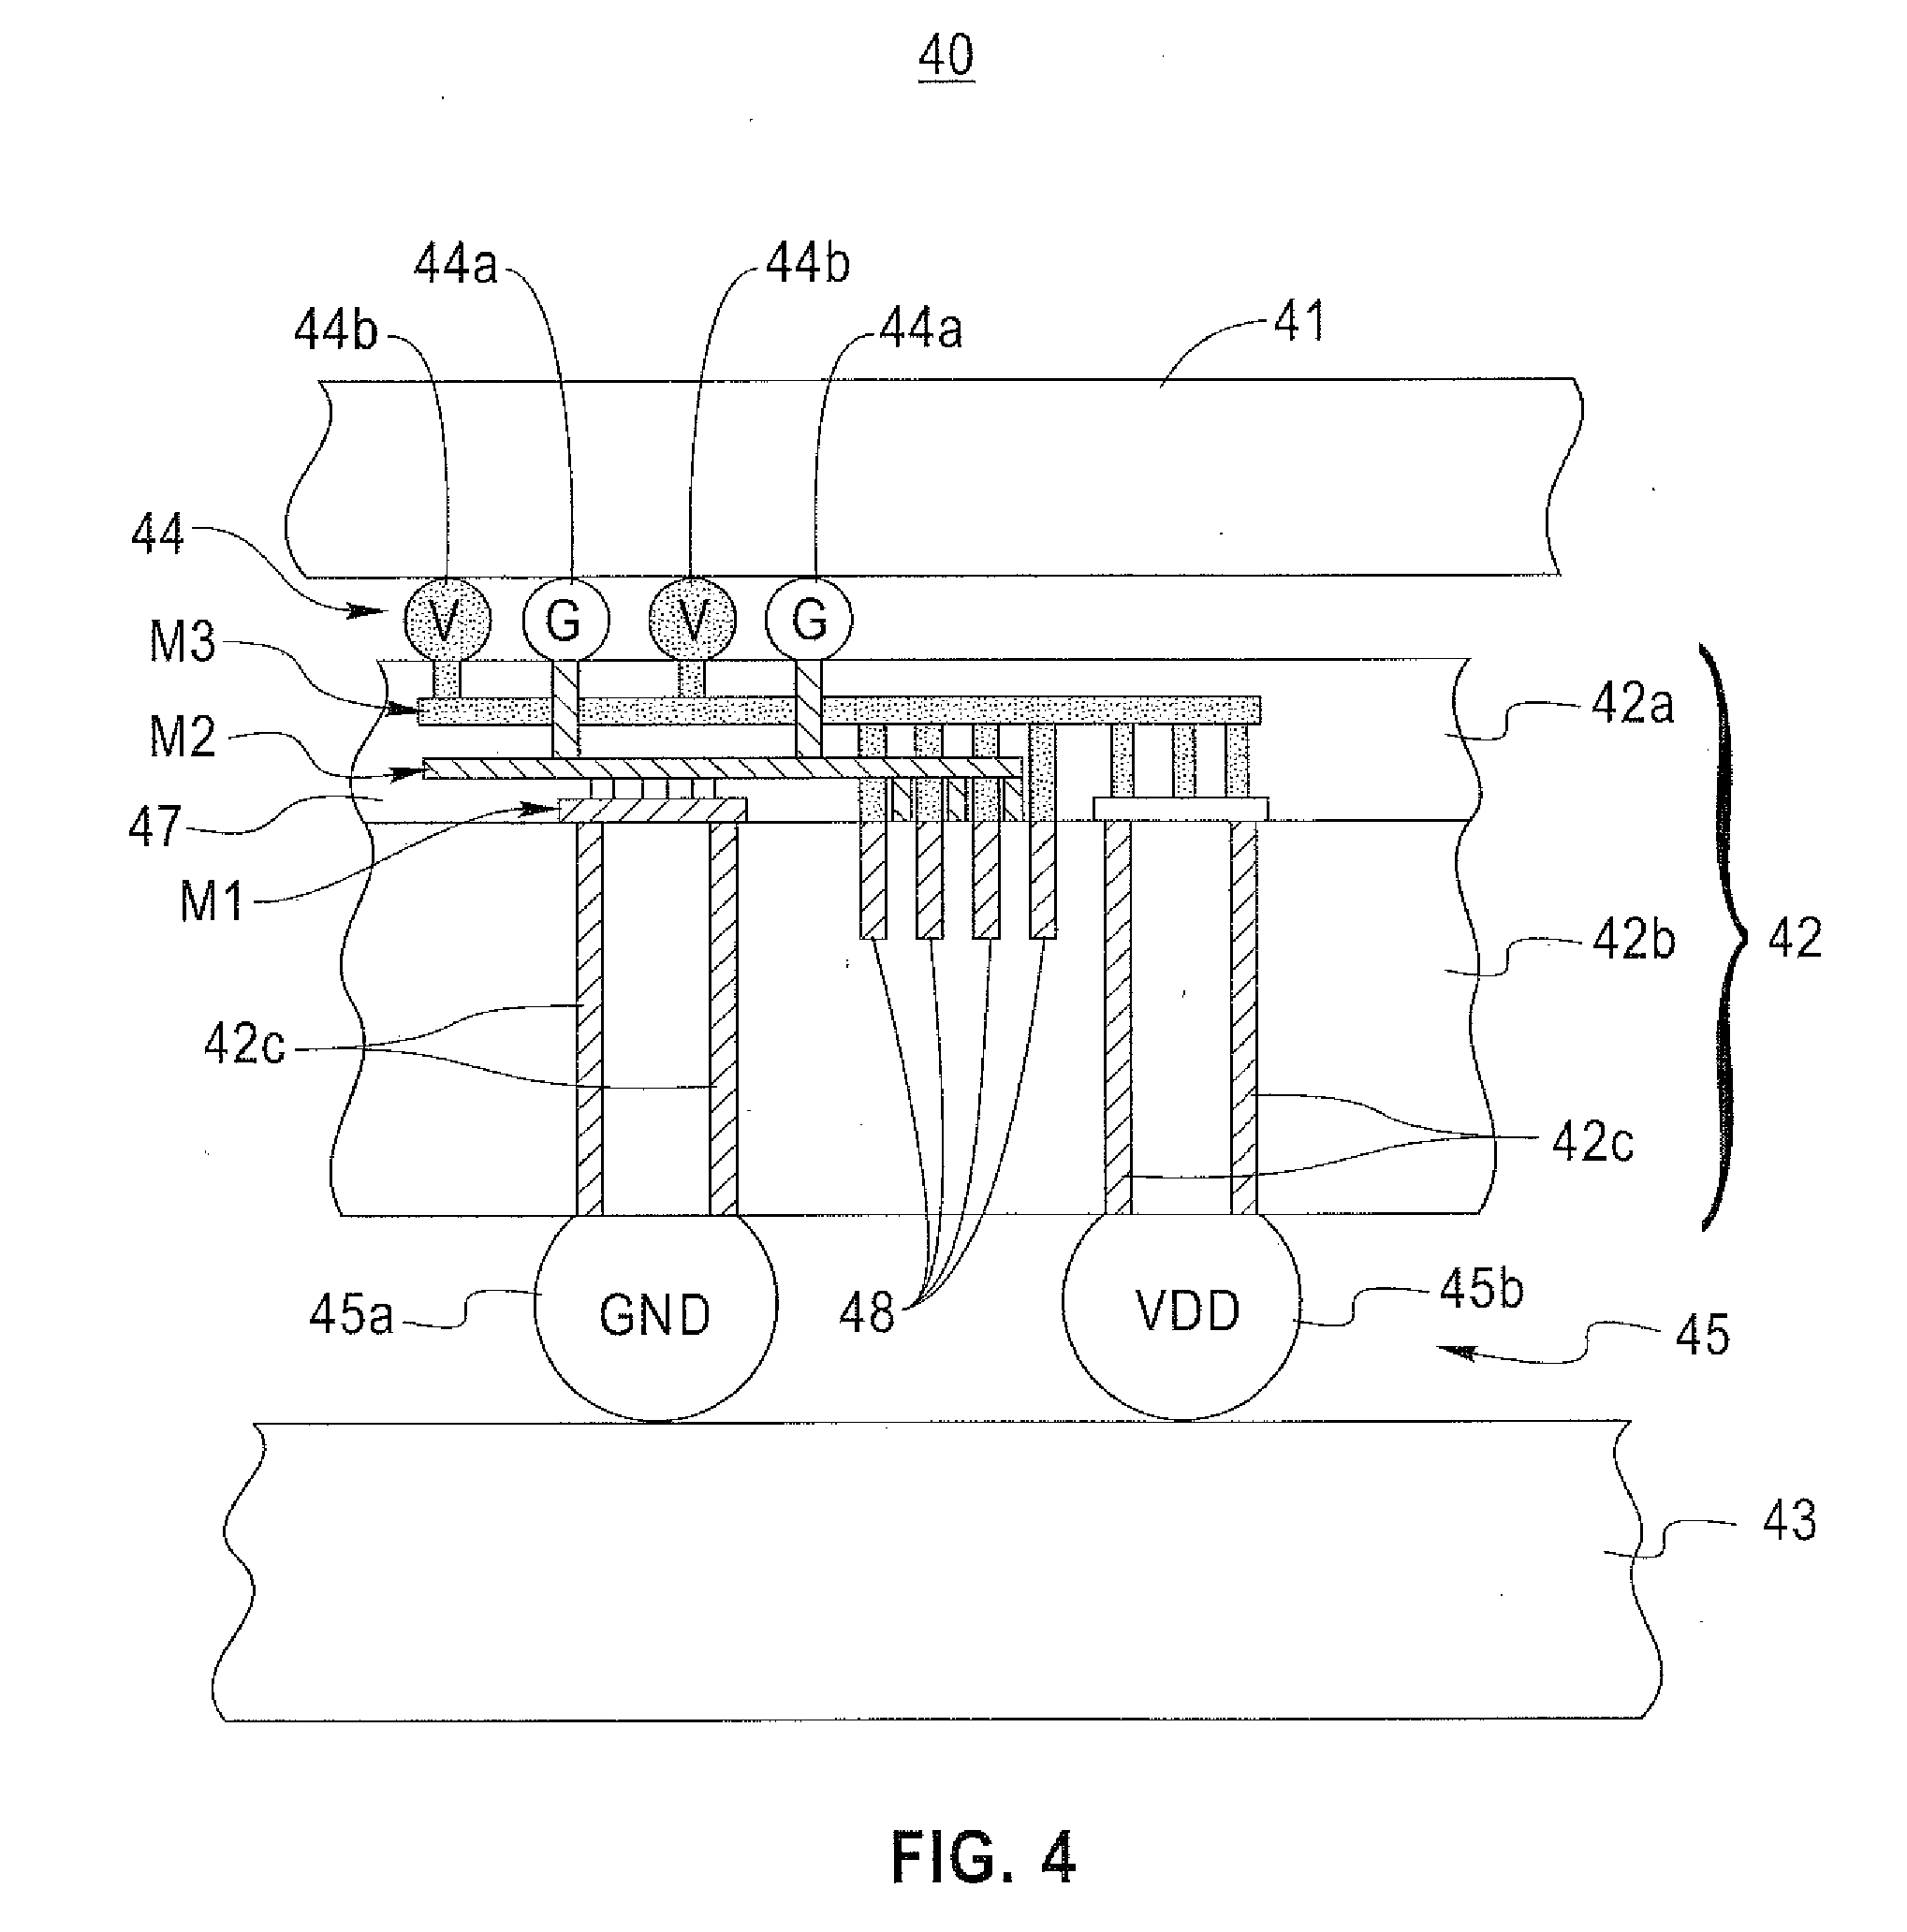 Apparatus and methods for constructing semiconductor chip packages with silicon space transformer carriers